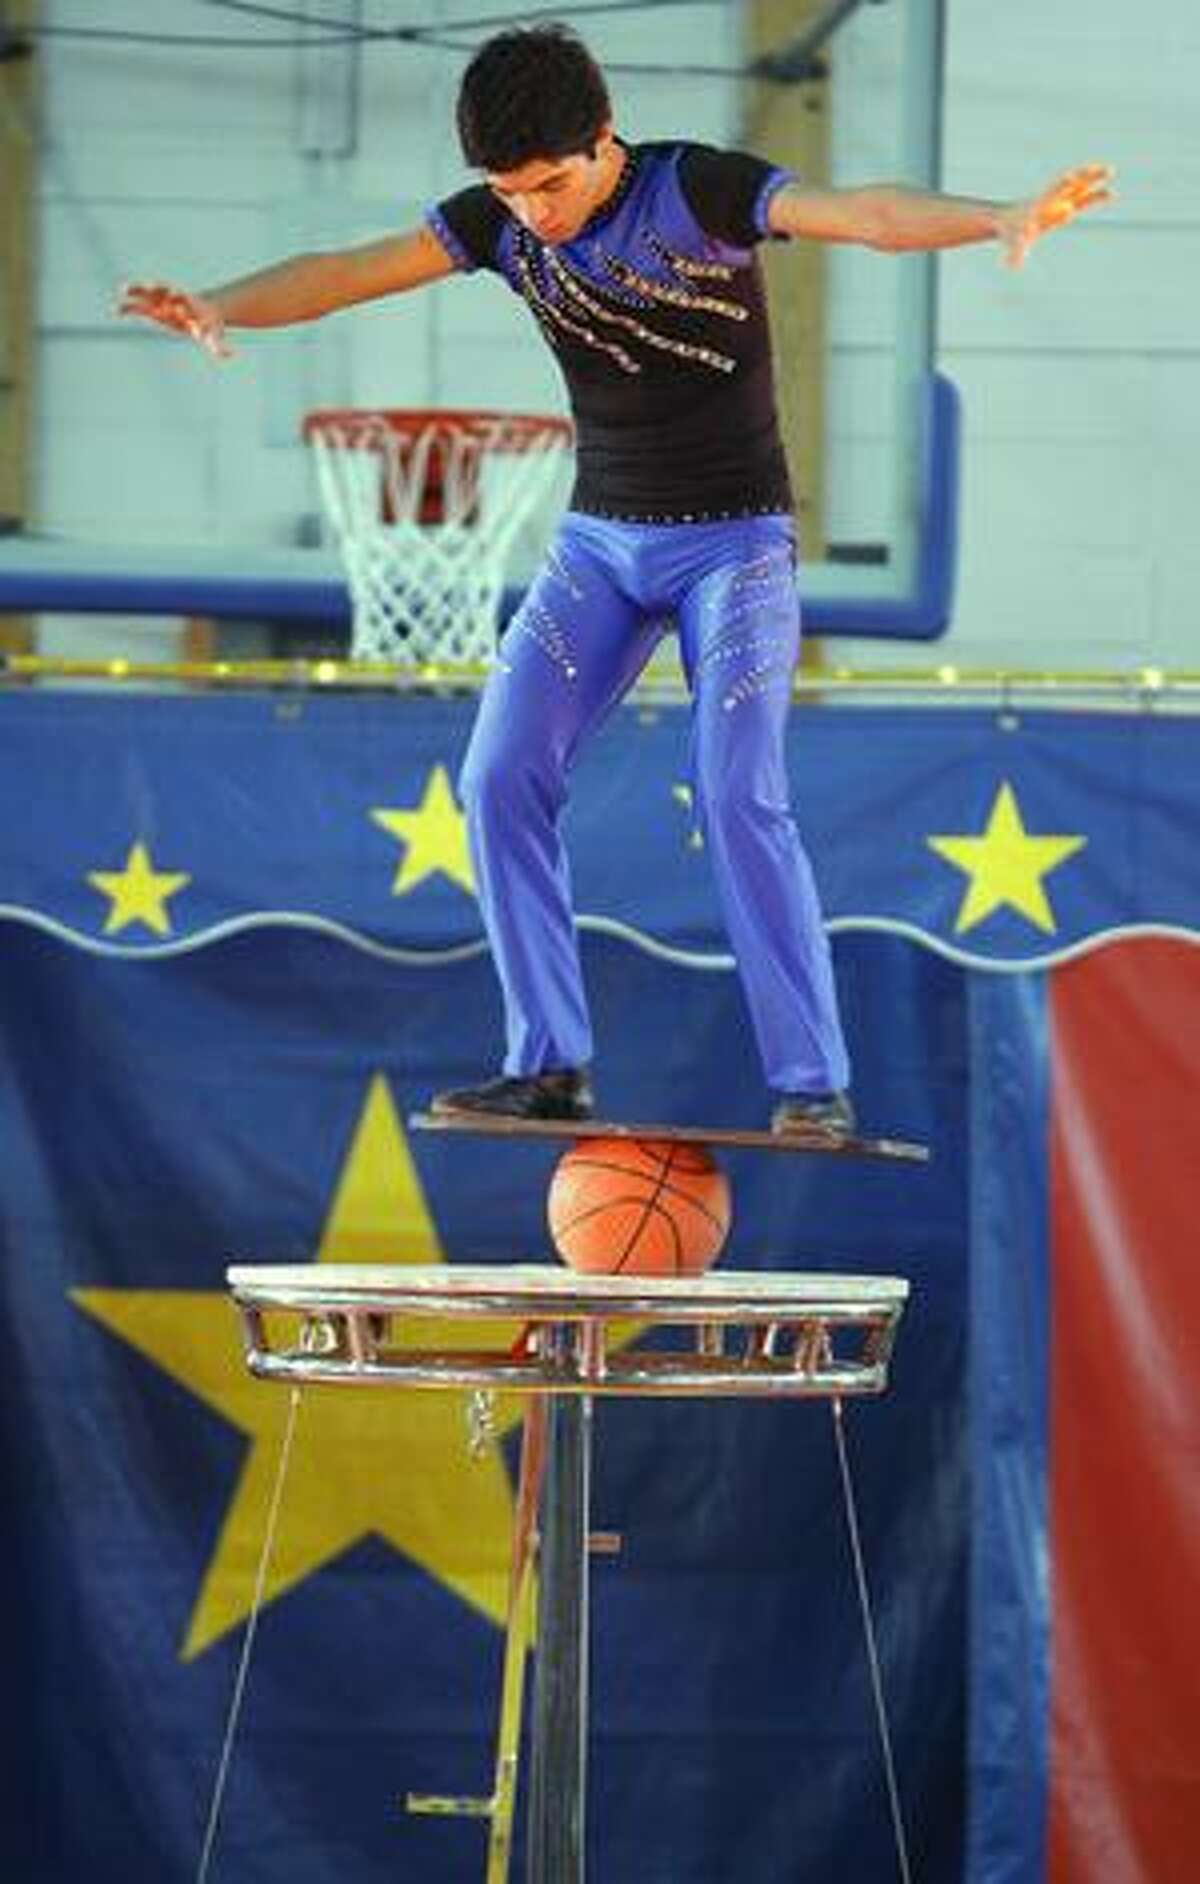 Photo by JOHN HAEGER A circus performer balances atop a basketball during the Billy Martin's Cole All-Star Circus on Saturday, Jan. 29, 2011 at Oneida High School. The circus was sponsored by the Zonta Club of Oneida.